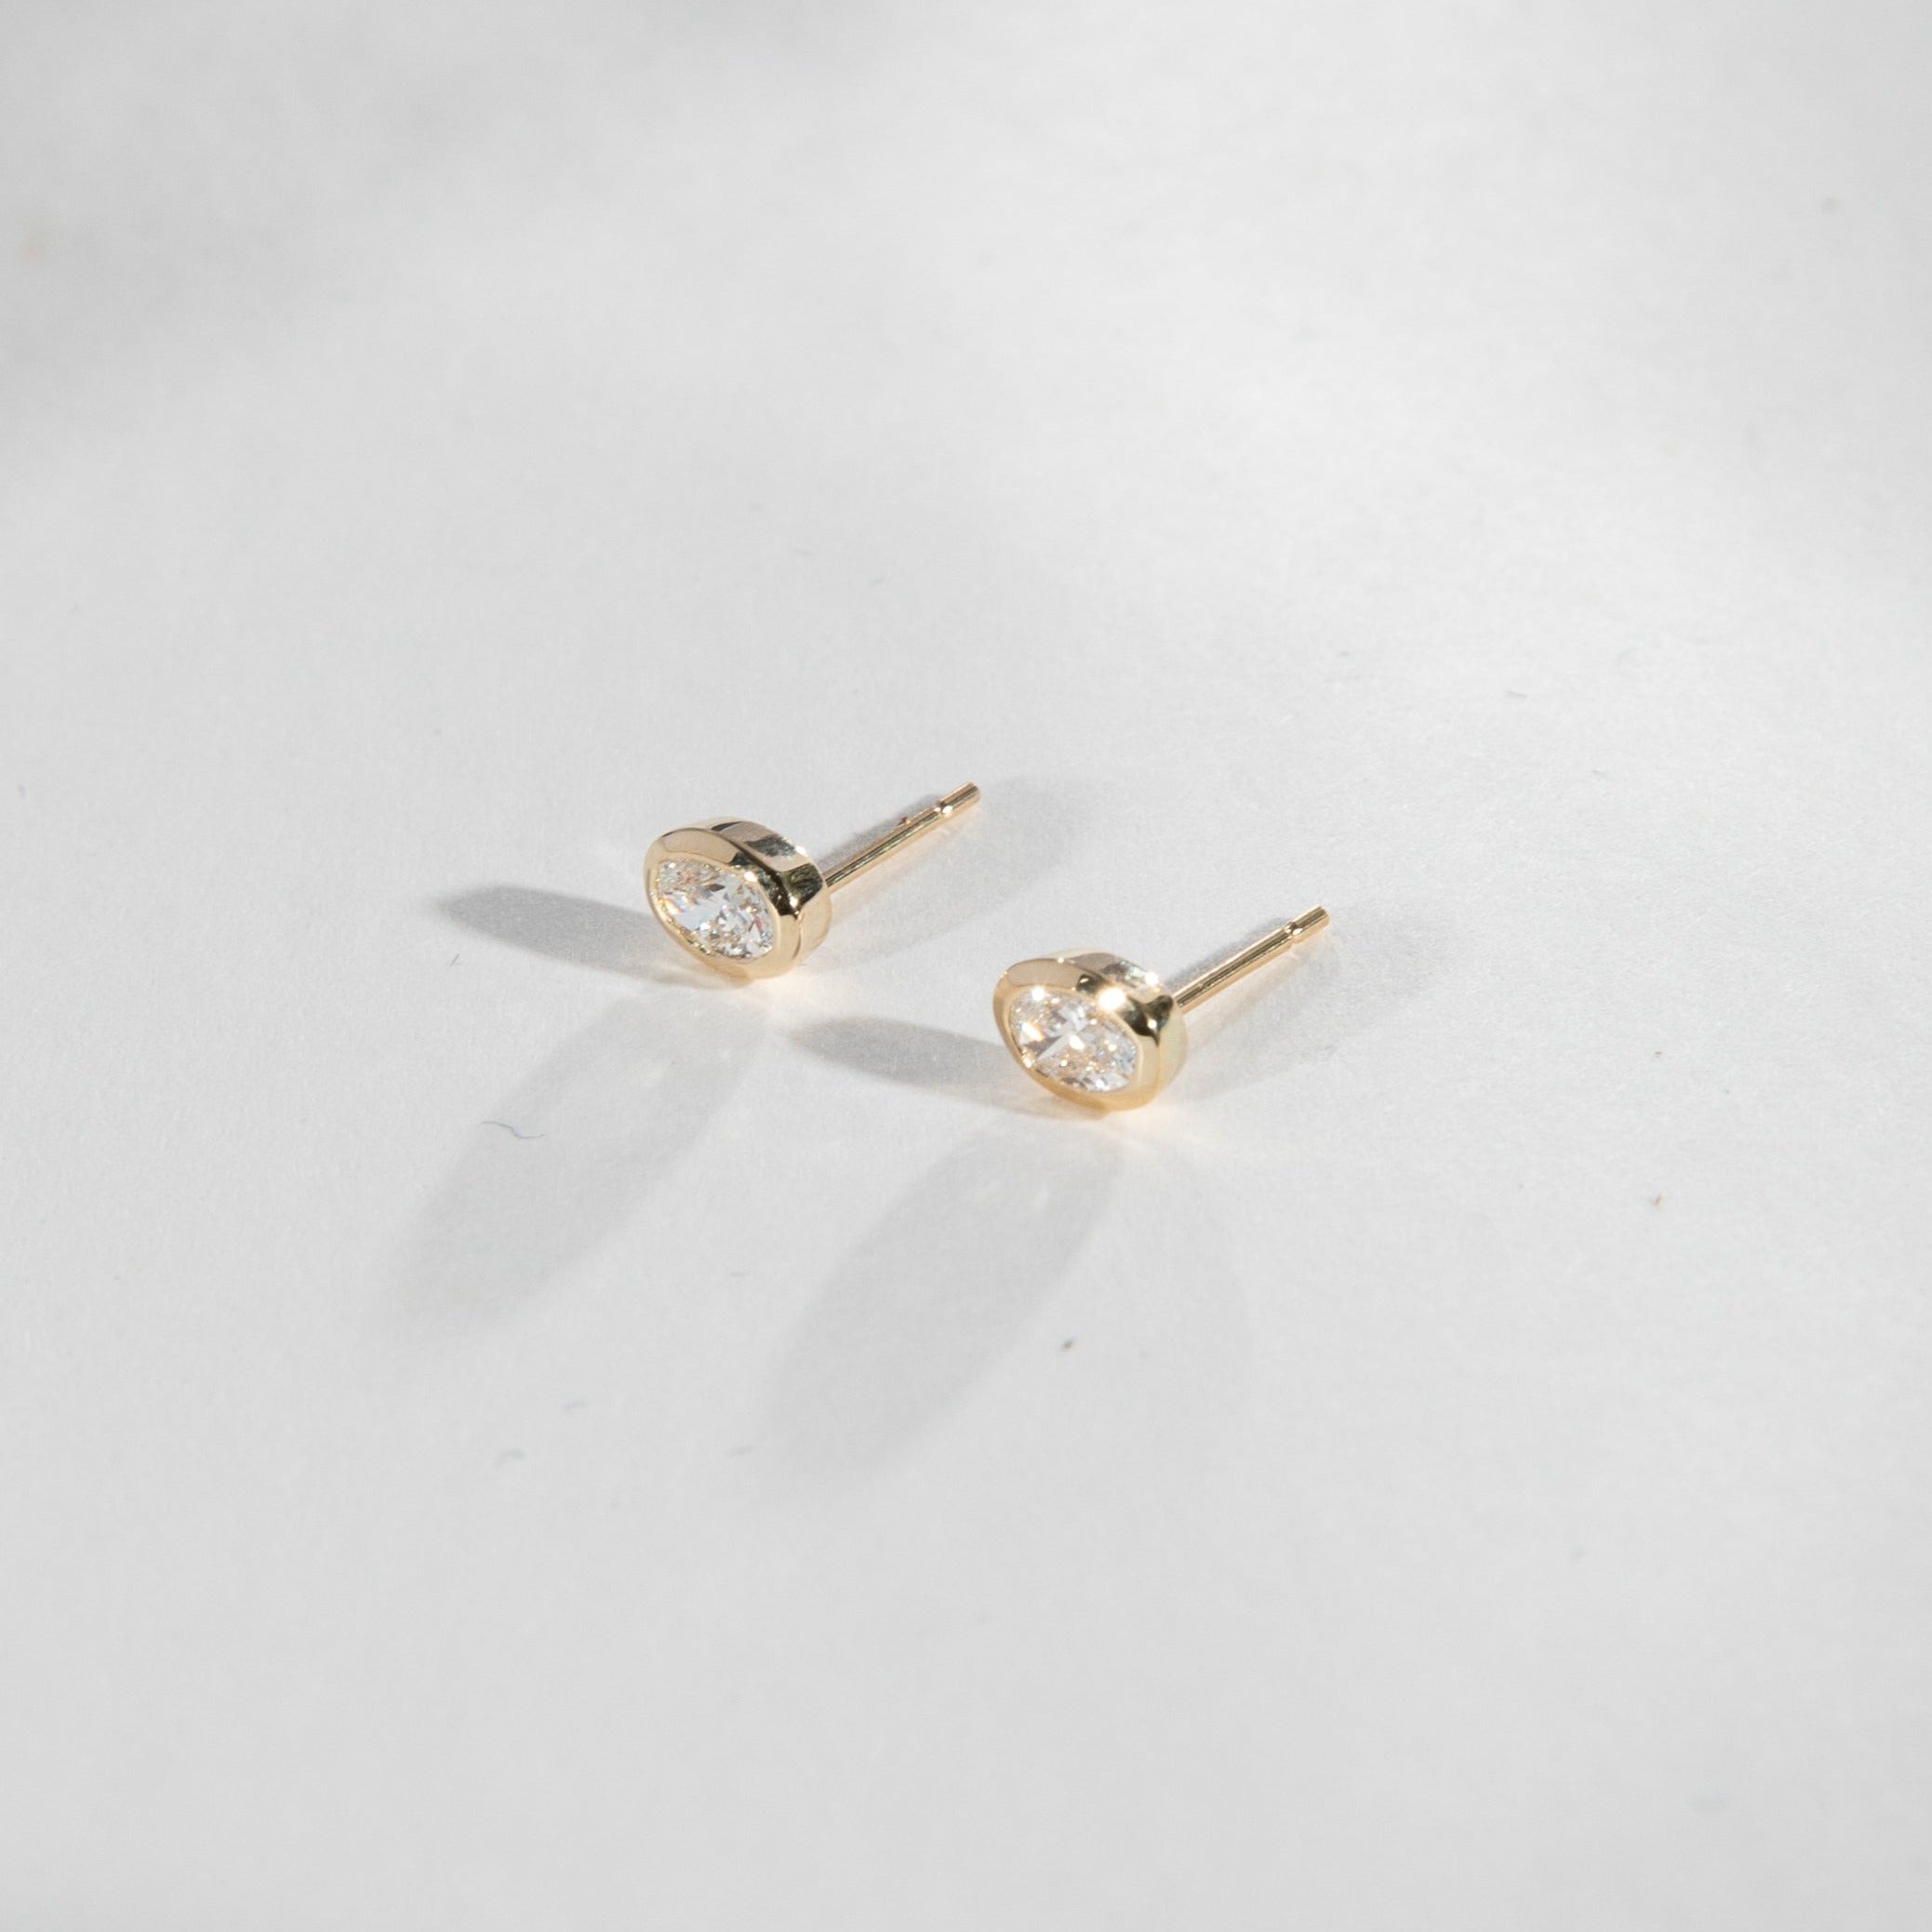 Ana Plain Earrings in 14k Gold set with lab-grown diamonds By SHW Fine Jewelry NYC